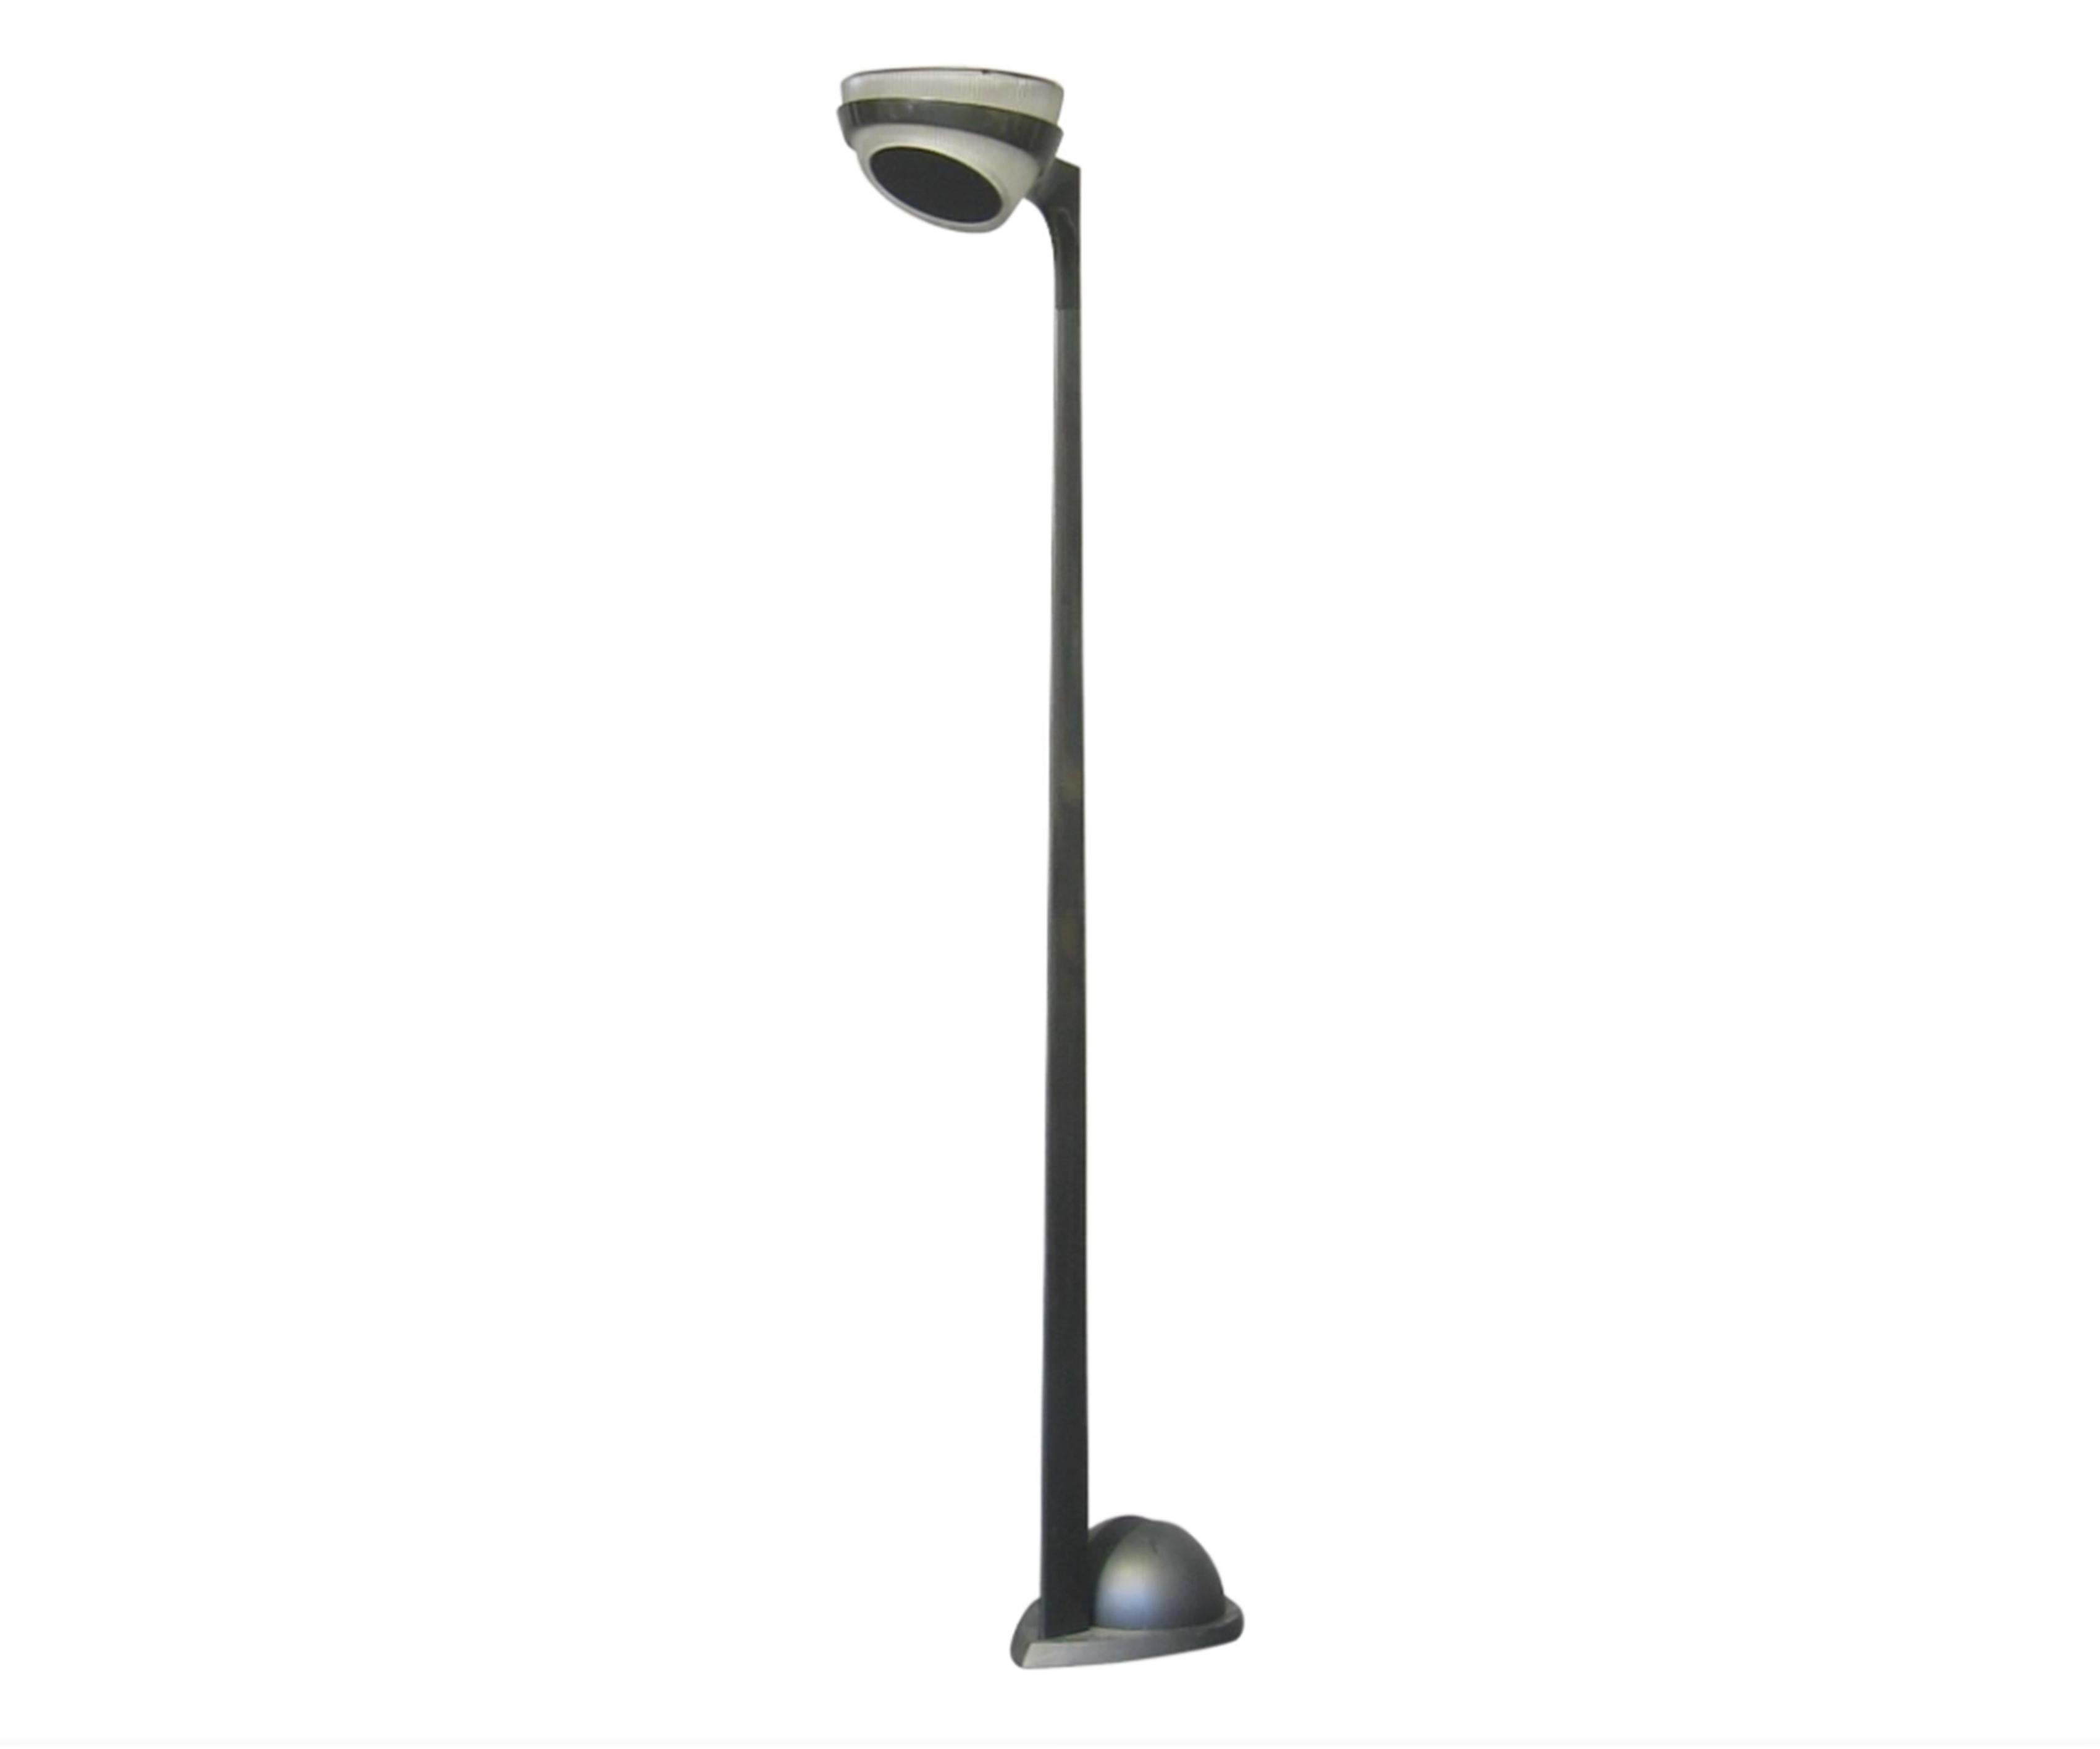 Cold-Painted RARE  Sistema Grall floor lamp by Ferrari, Pagani, and Perversi for Arteluce  For Sale